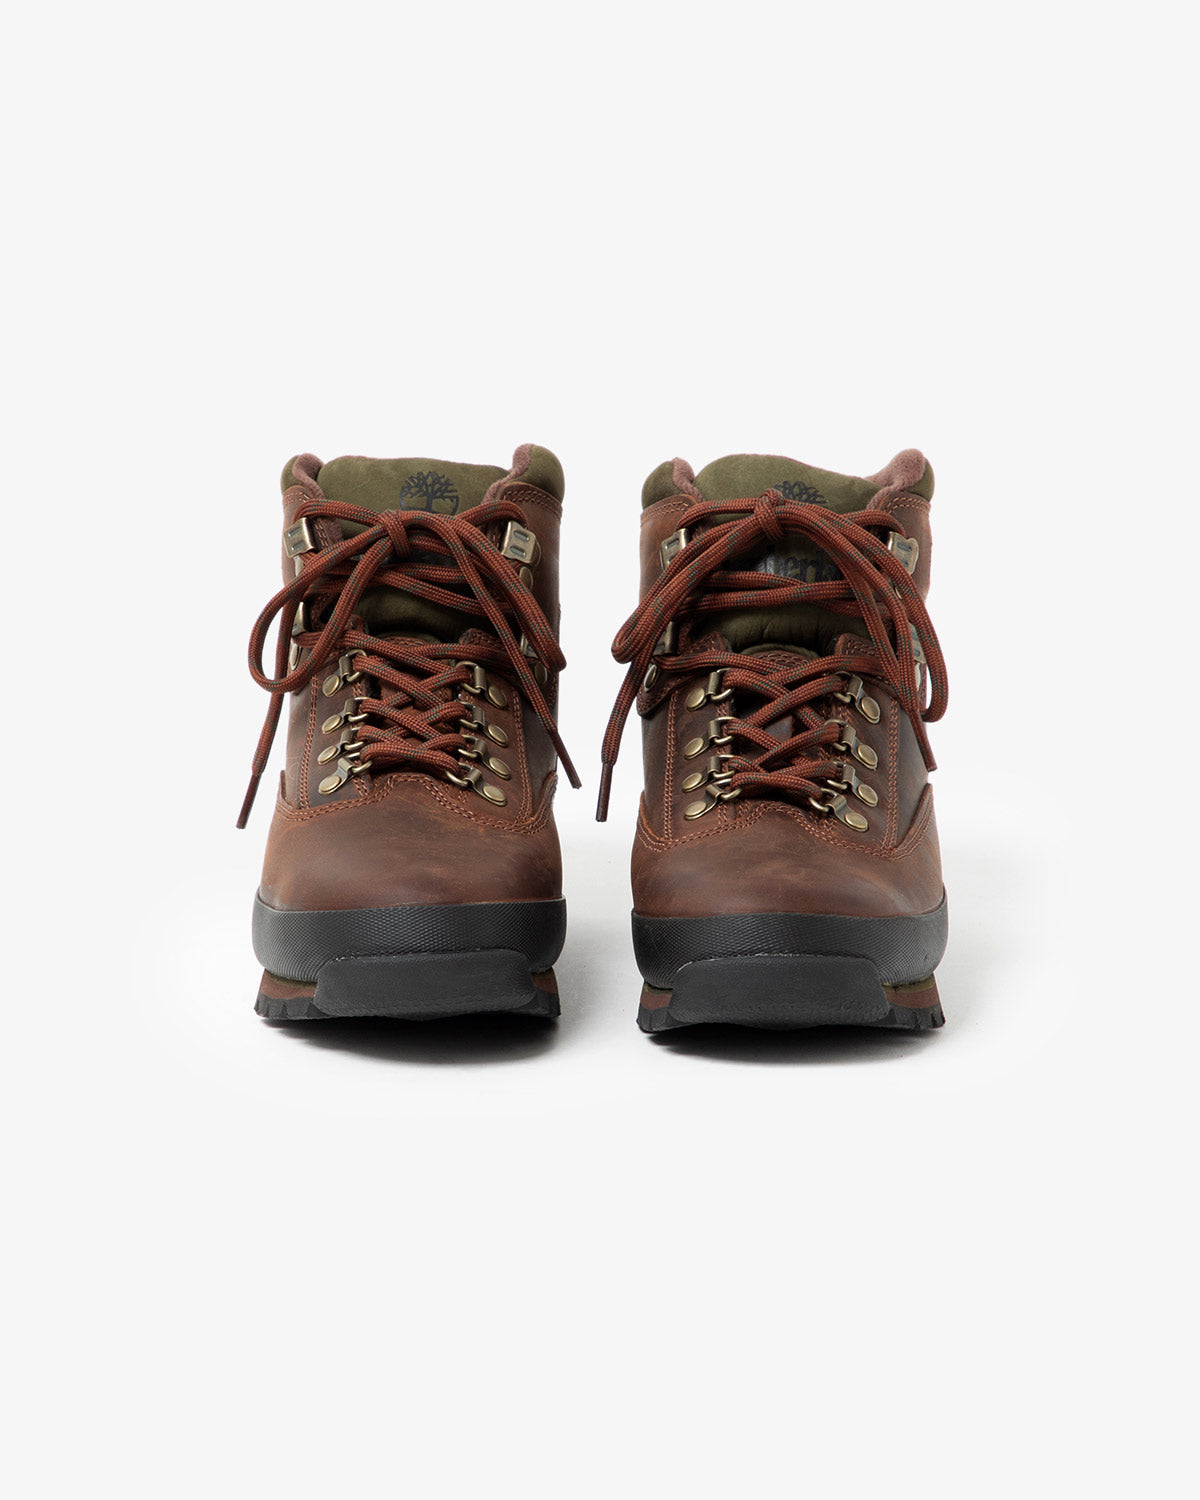 EURO HIKER LEATHER